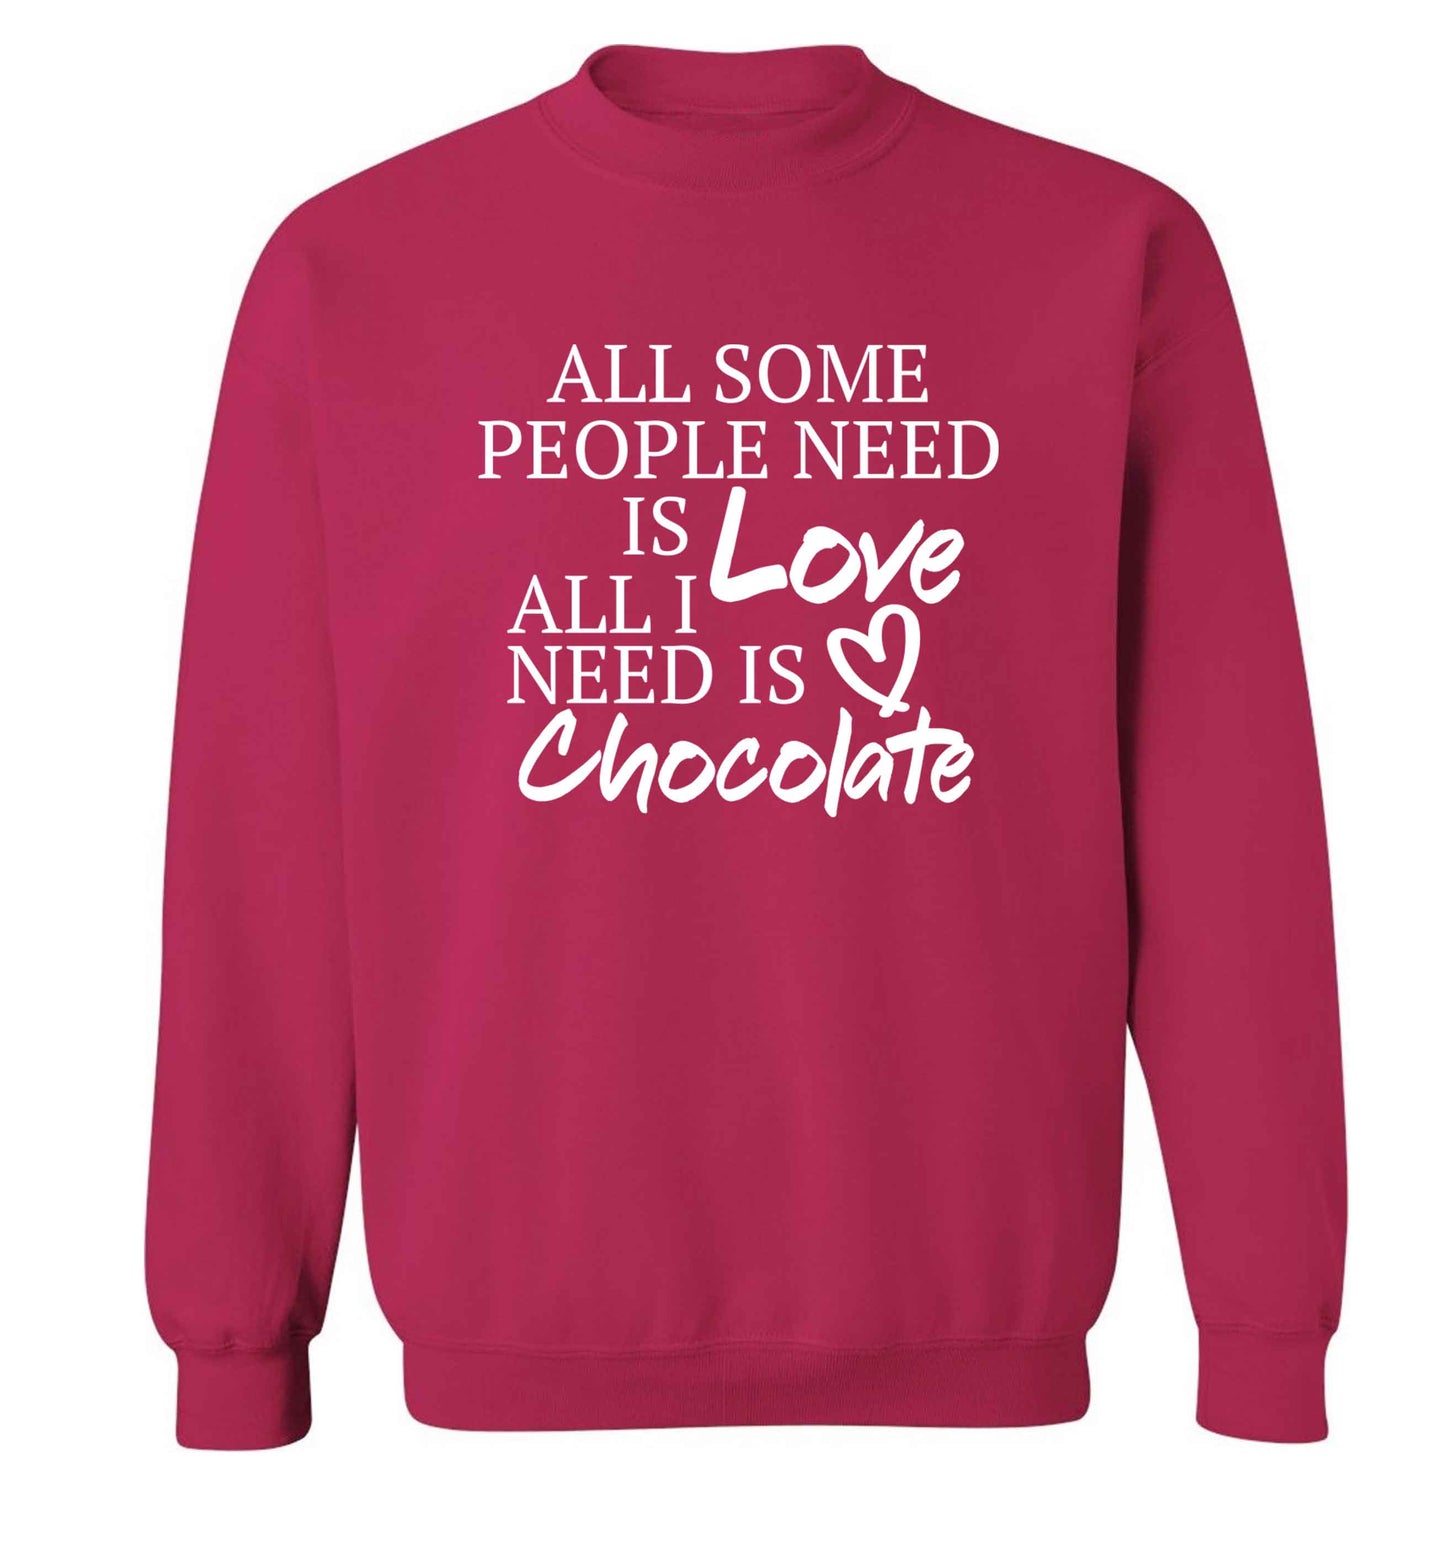 All some people need is love all I need is chocolate adult's unisex pink sweater 2XL